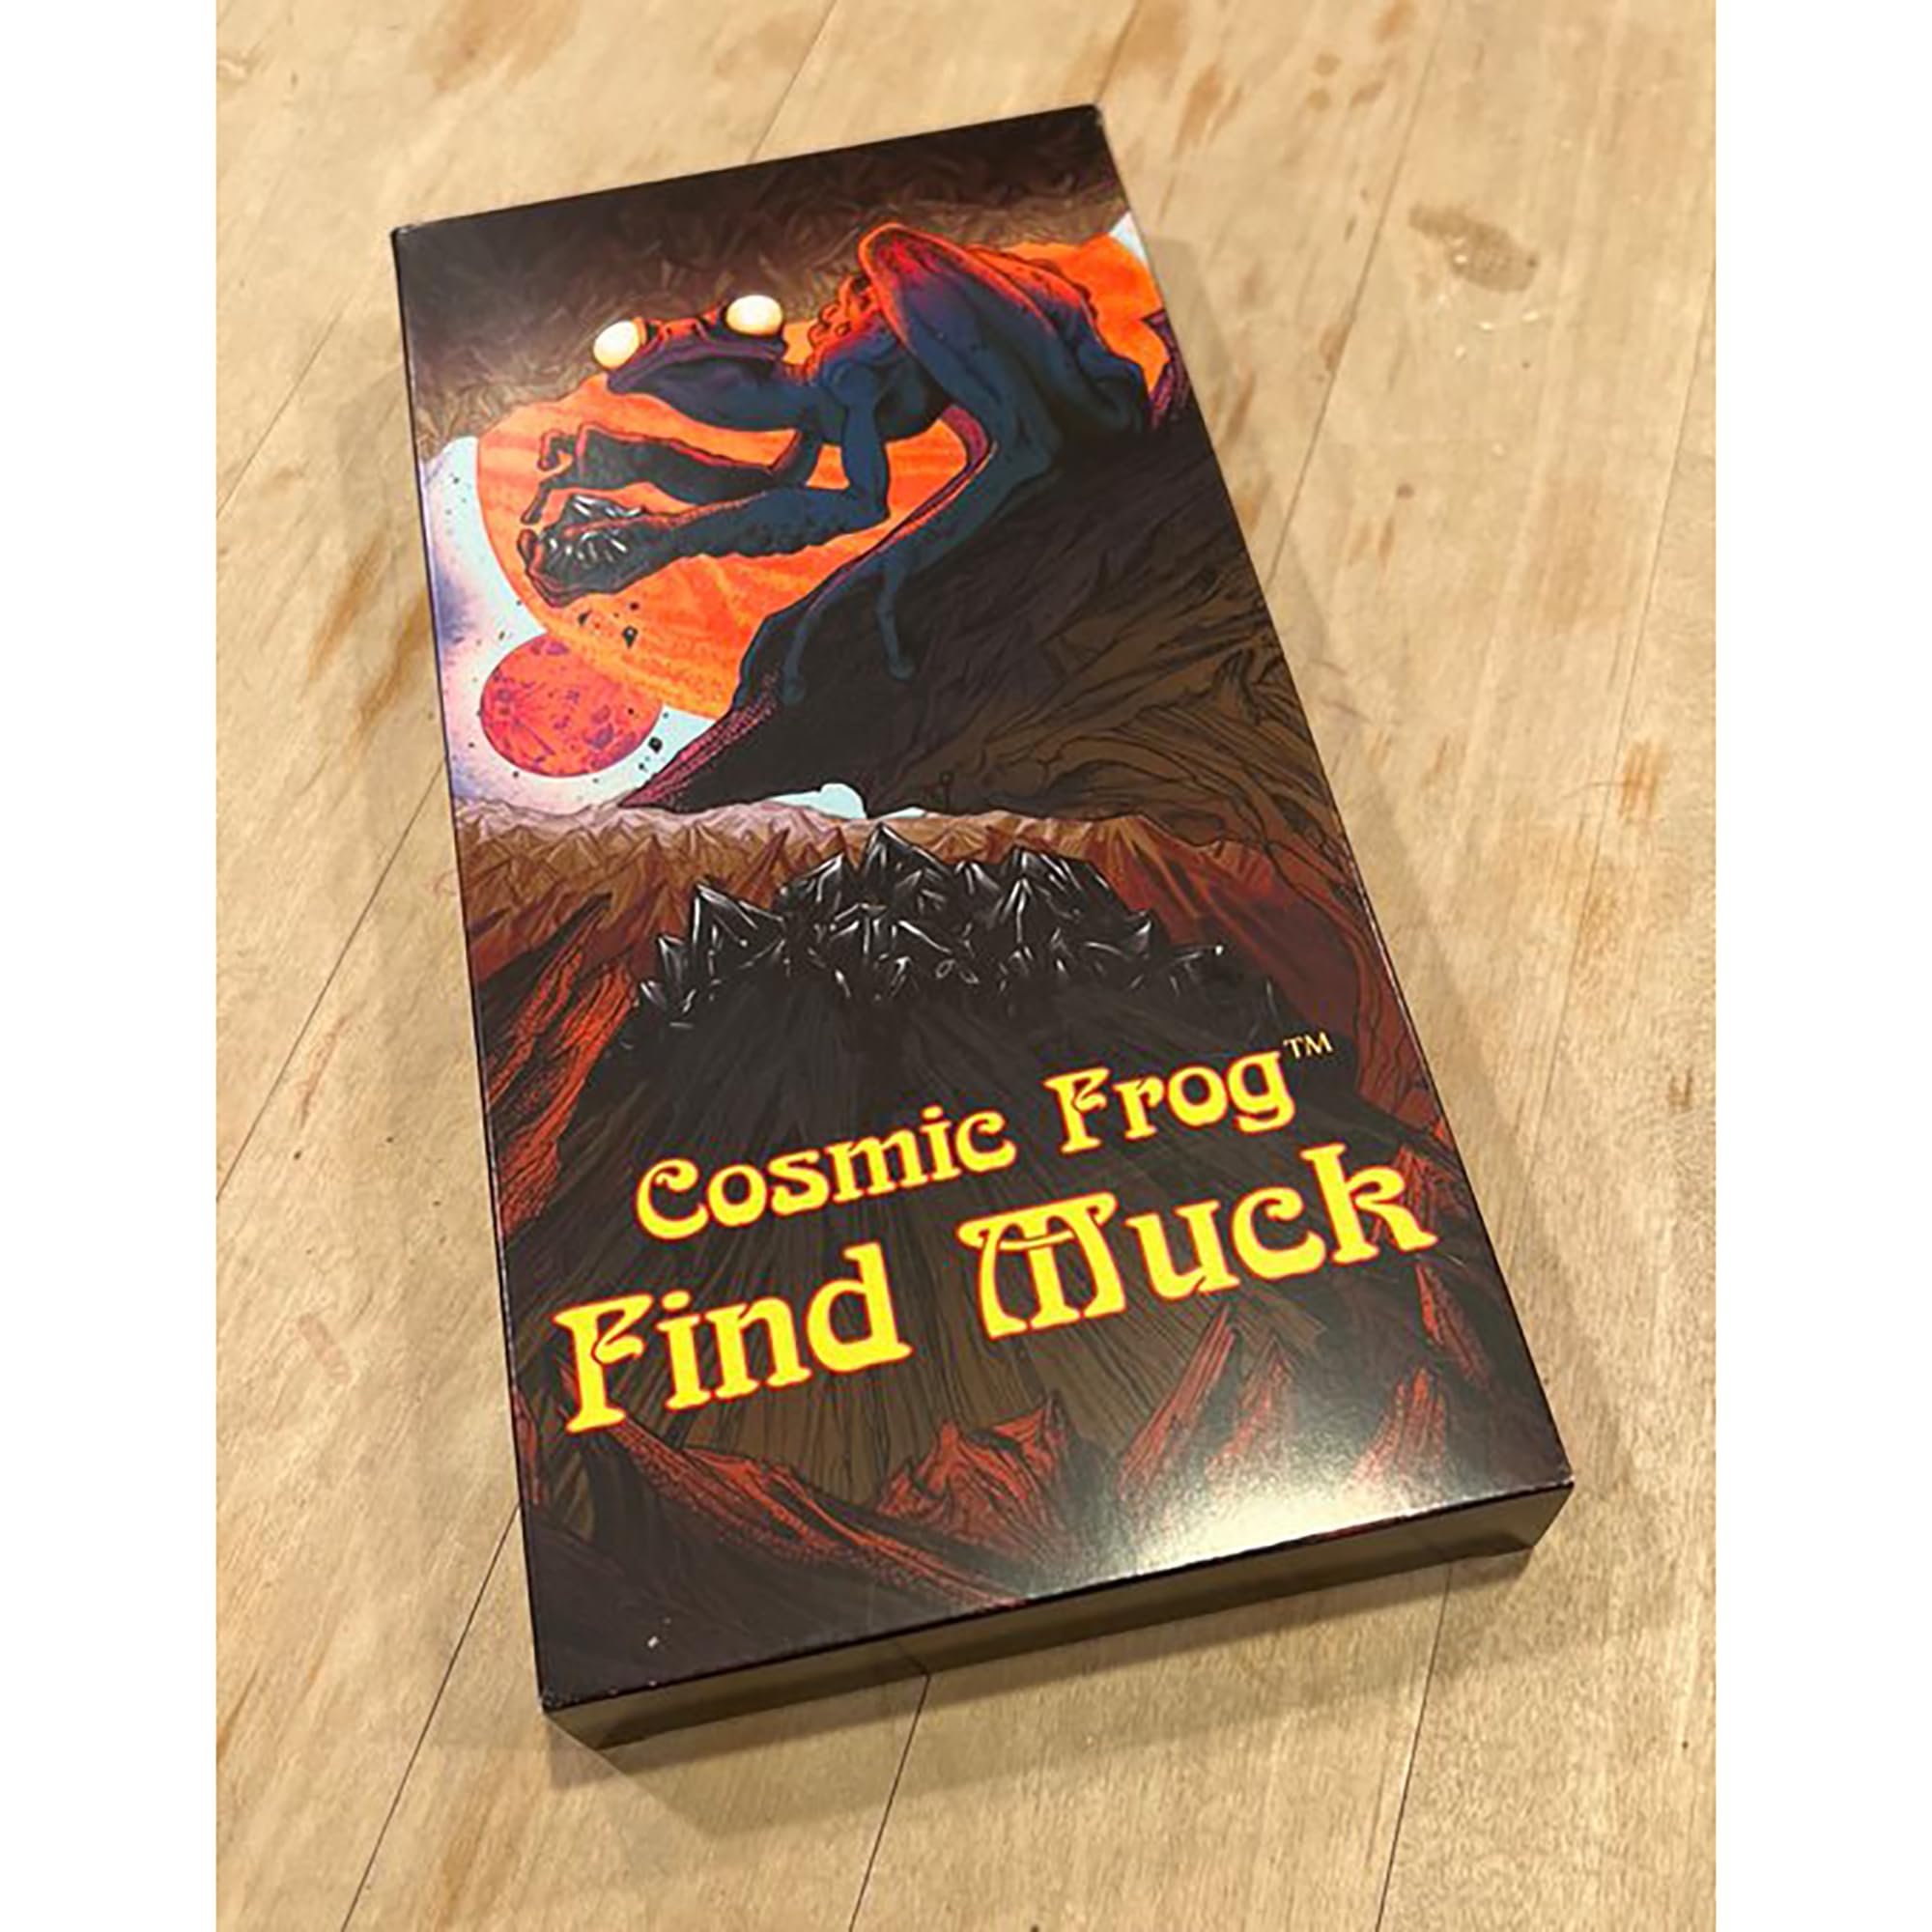 Cosmic Frog: Find Muck Expansion - Devious Weasel Games, Adds Mental Combat, Lands & Chip System, Ages 14+, 2-6 Players